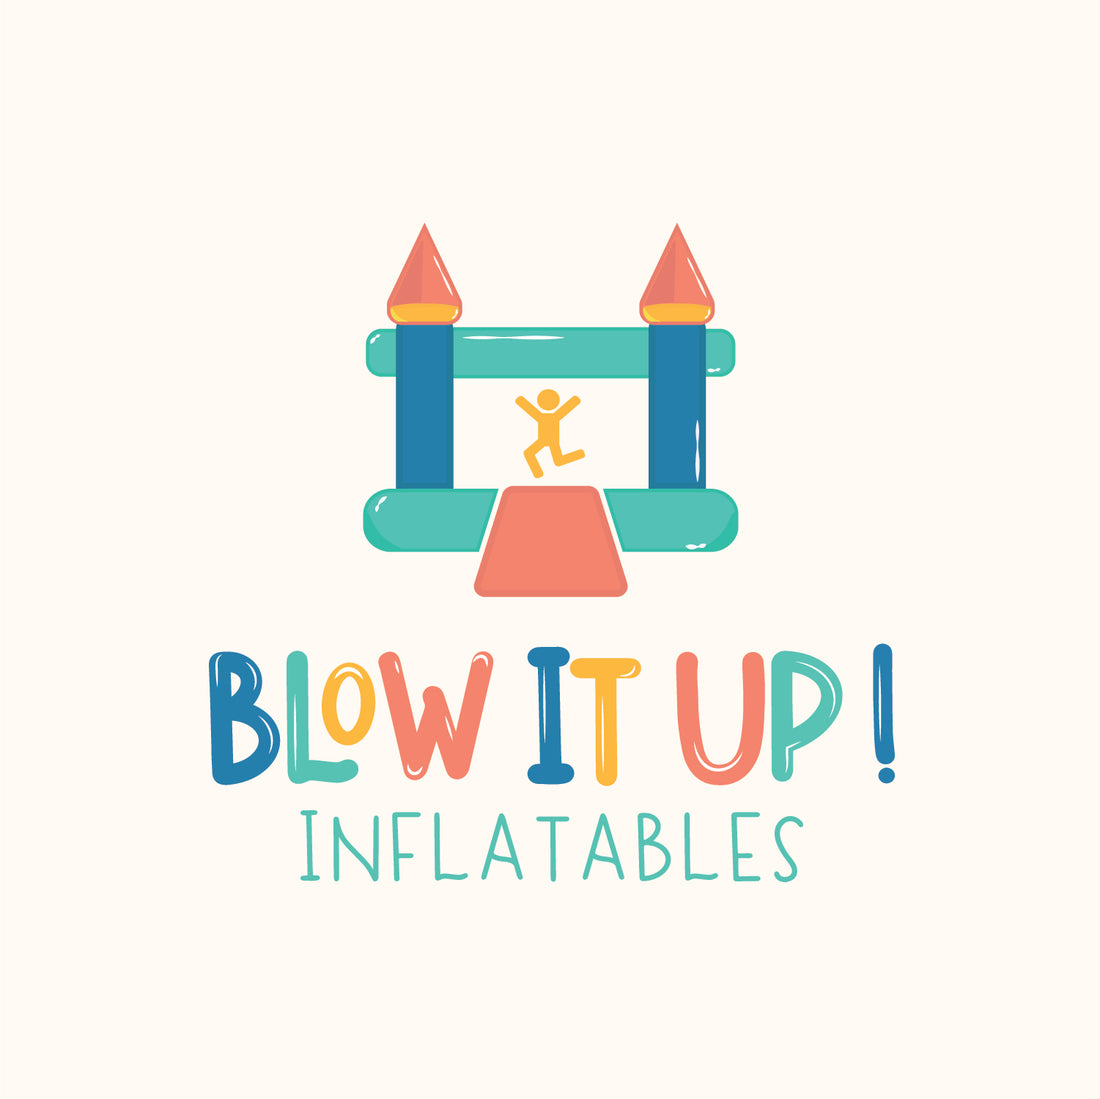 Blow It Up! Inflatables